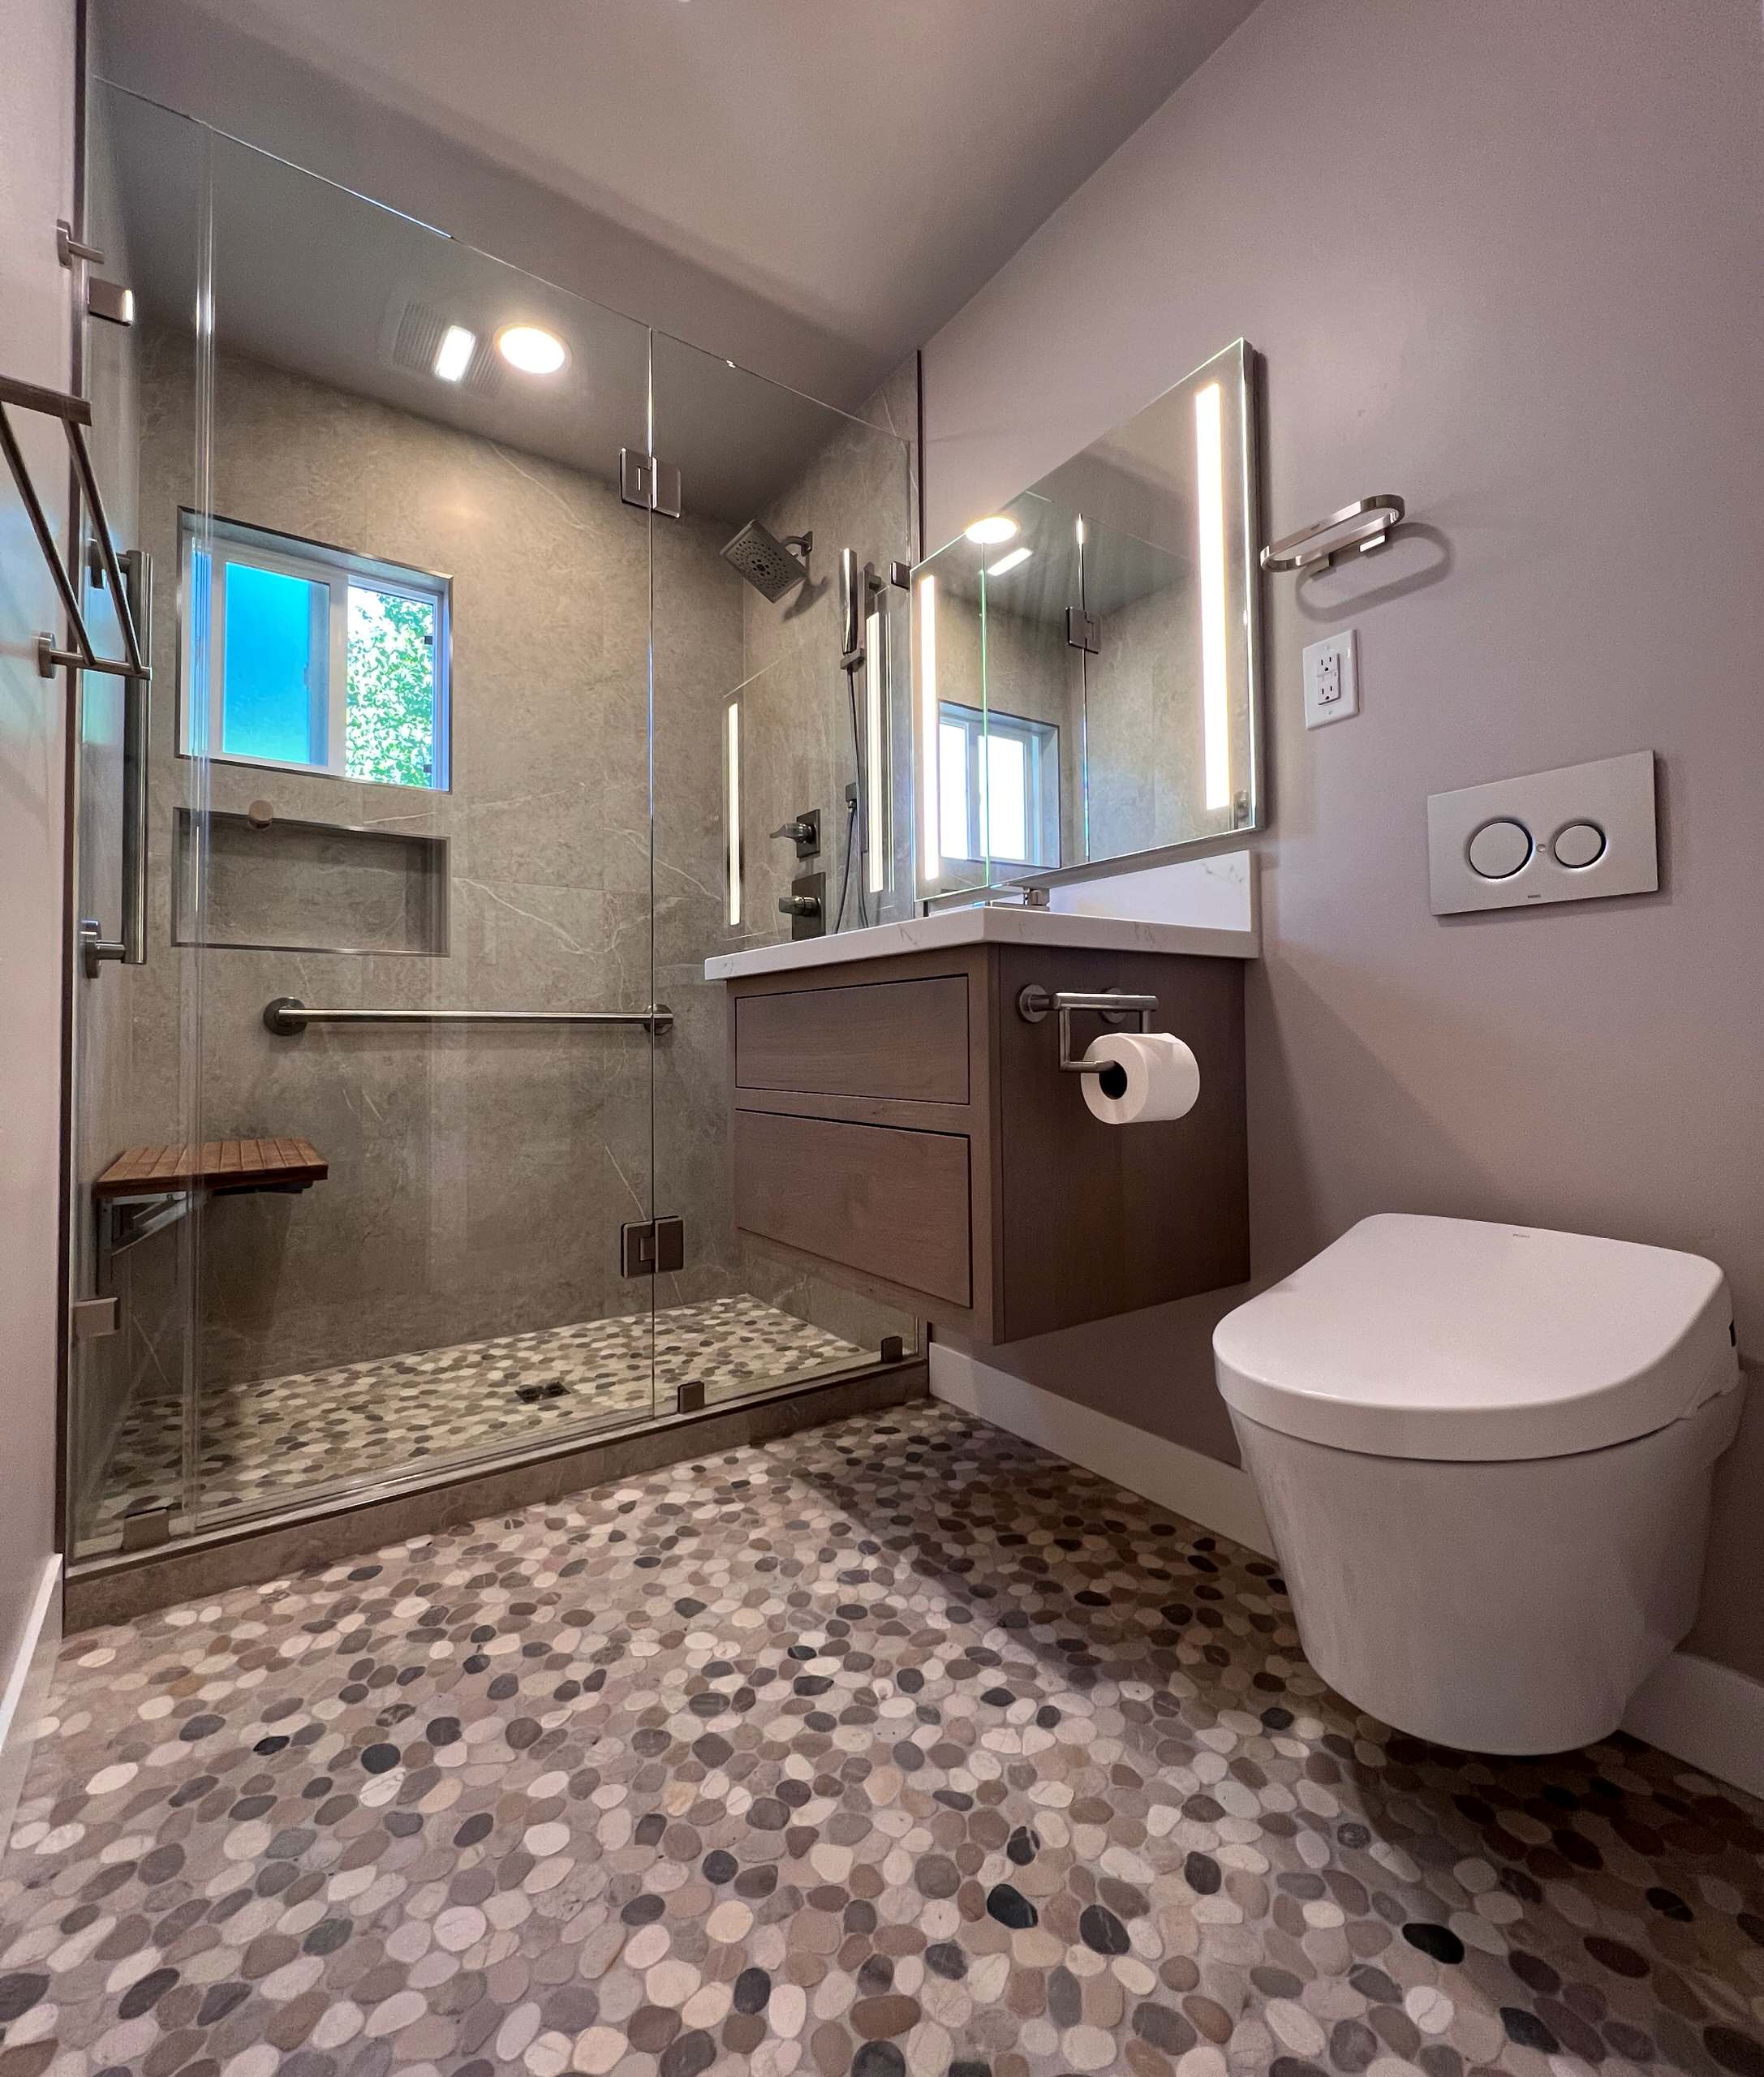 Tall Shower Enclosure, Raised Fixtures, Wall Hung Toto Toilet & Heated Floor